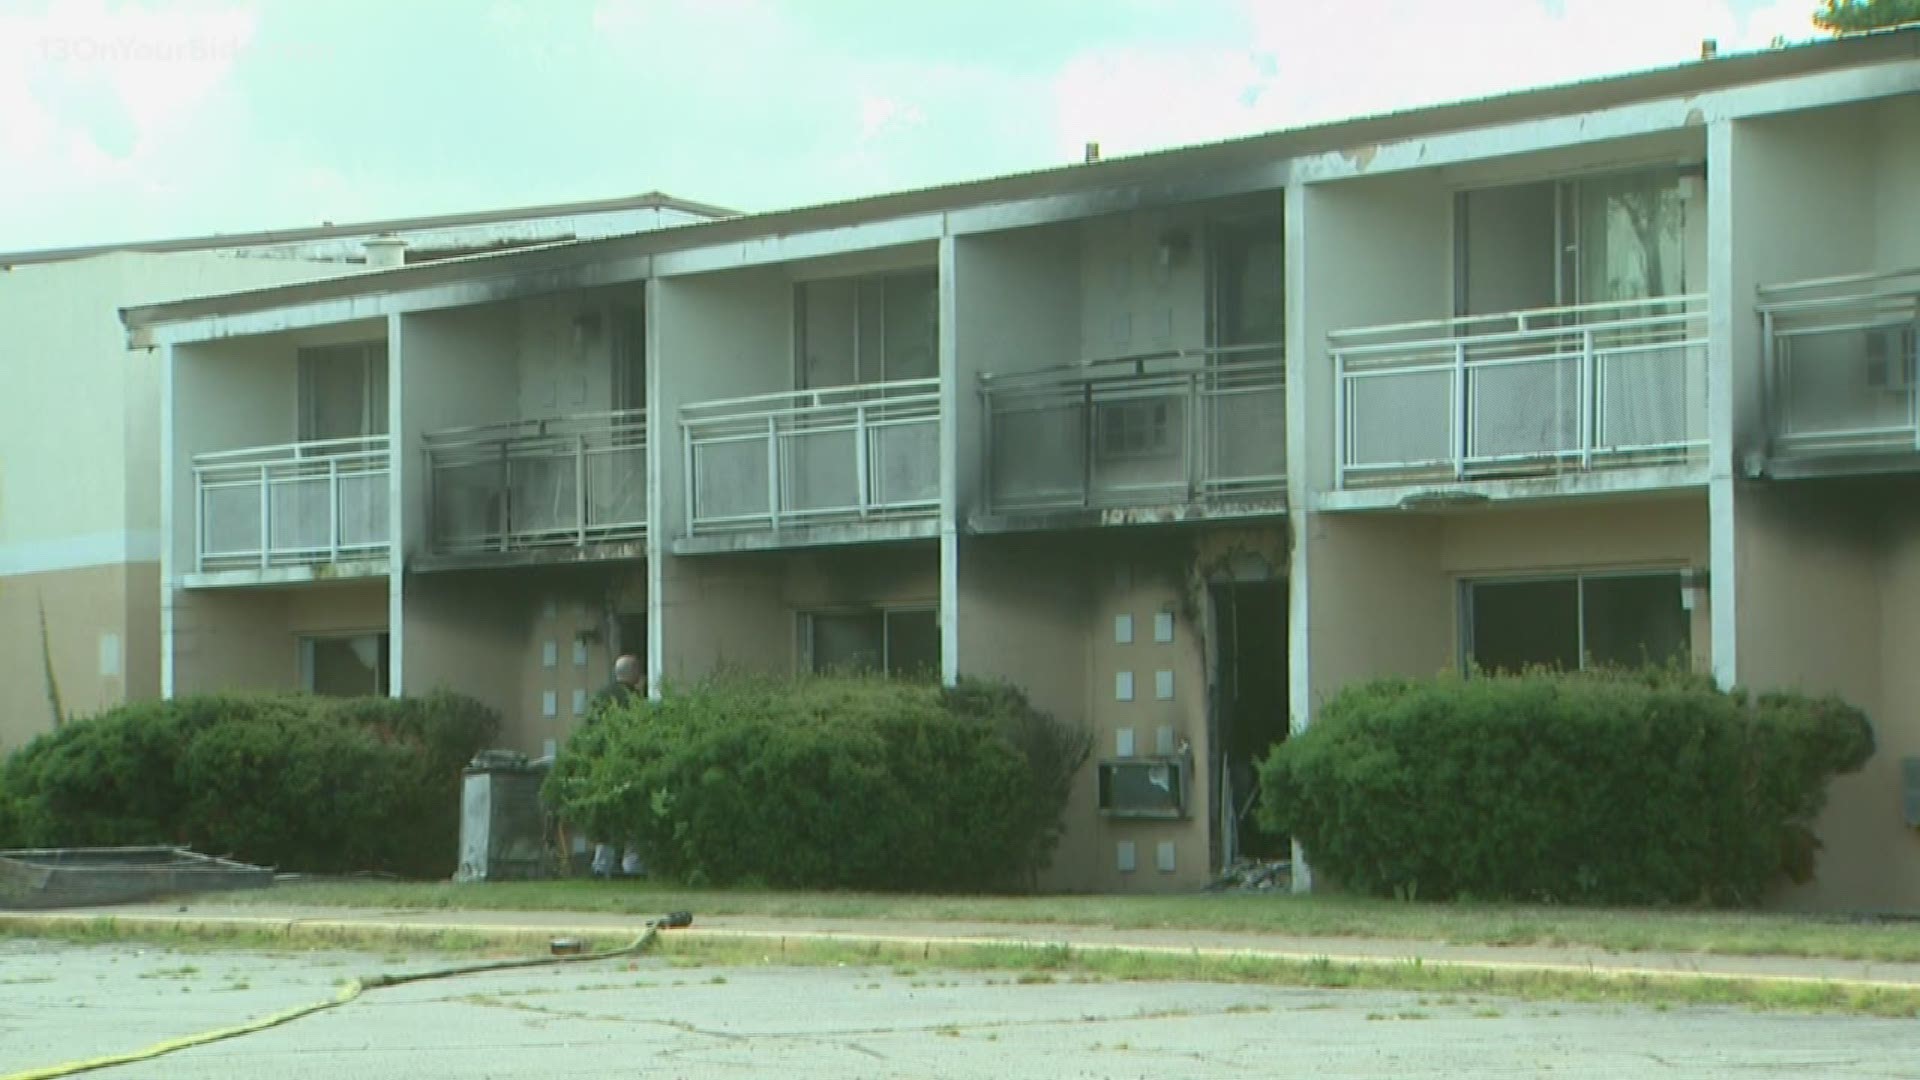 No charges filed in motel fire that killed 6